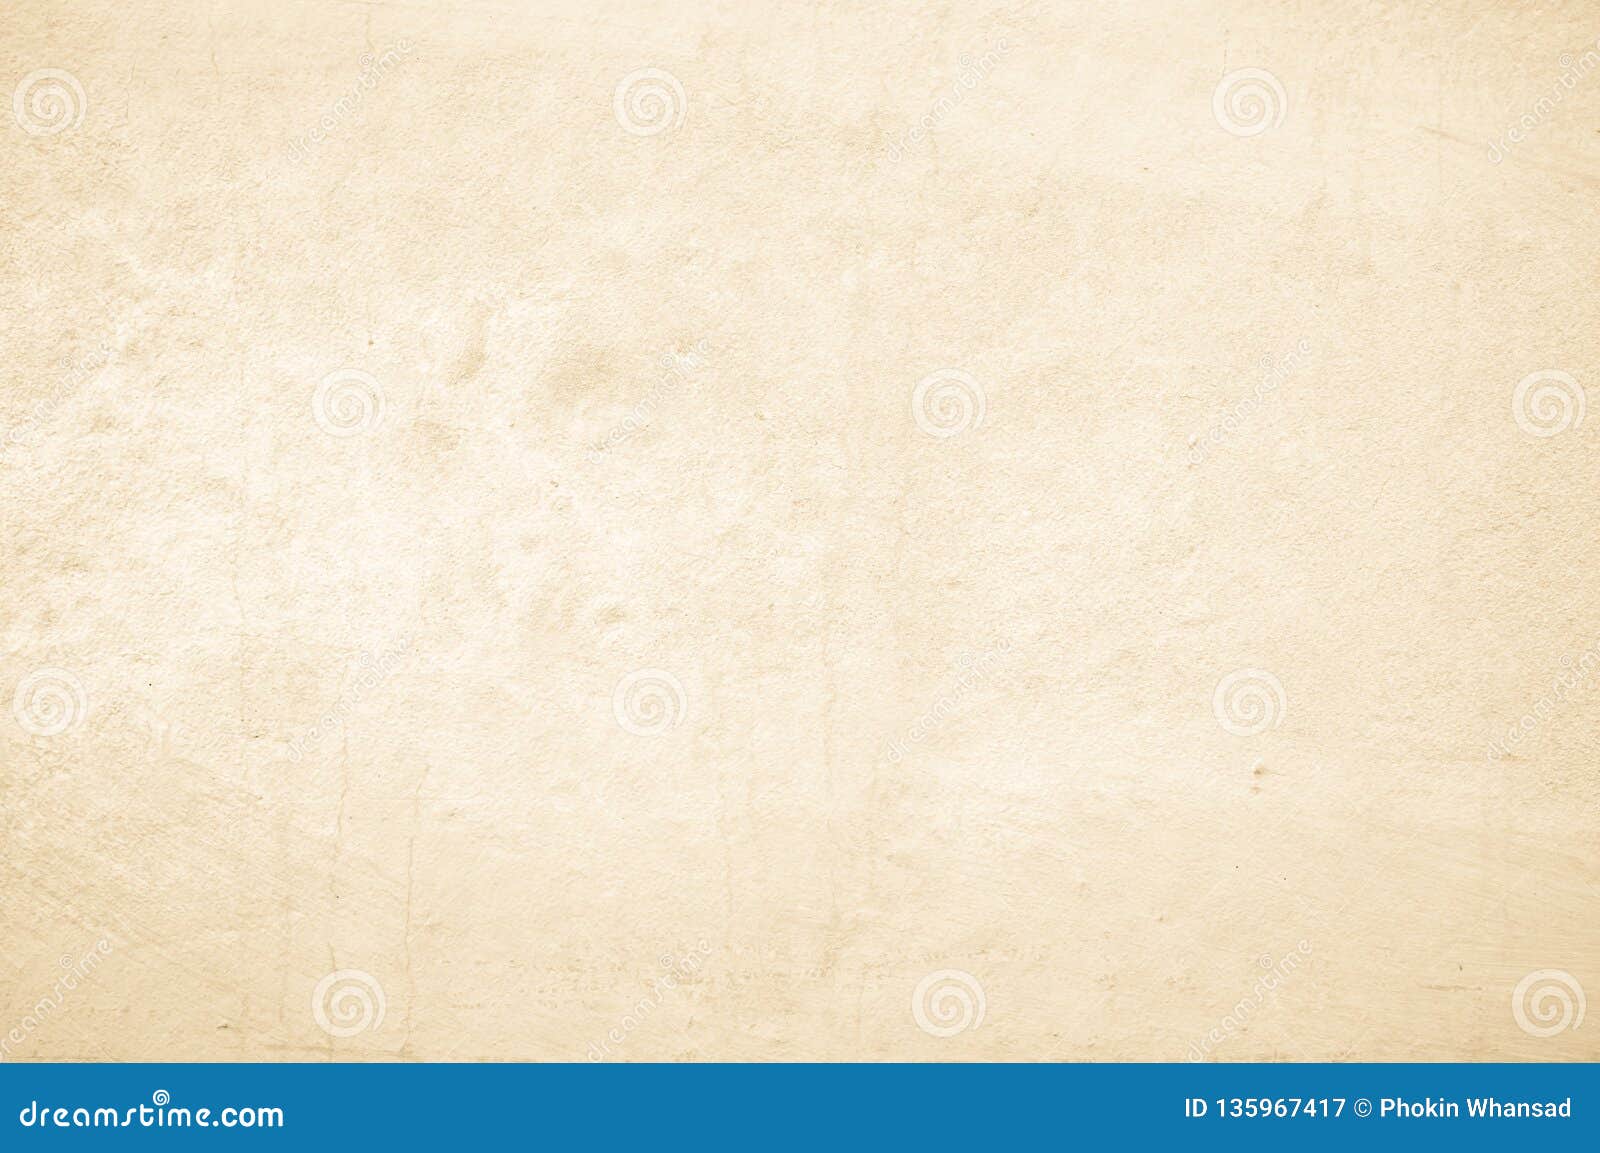 Art Concrete or Stone Texture for Background in Black, Brown and Cream  Colors. Stock Image - Image of antique, backdrop: 135967417